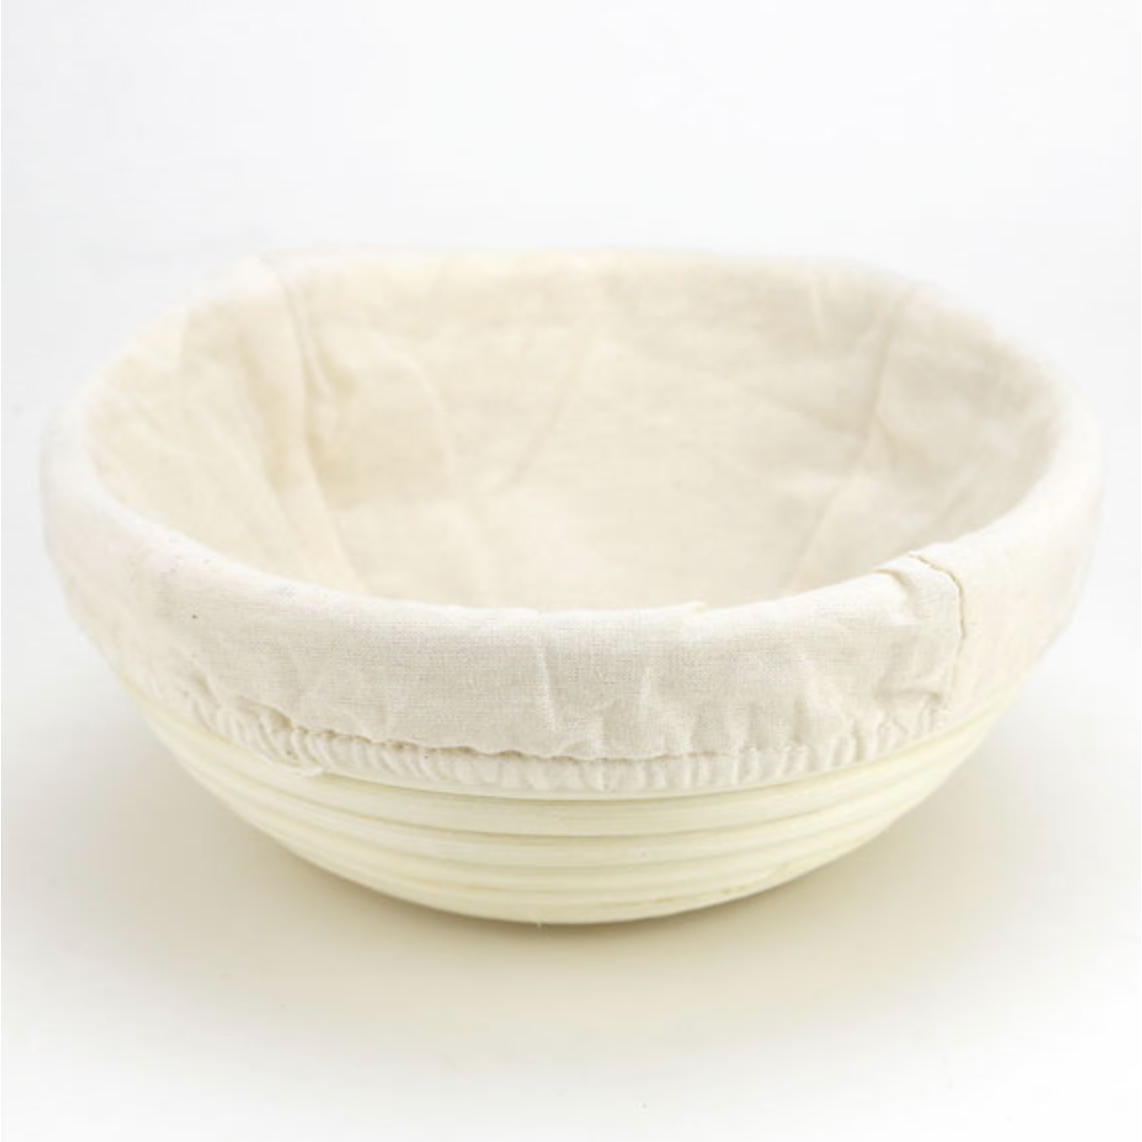 A bread proofing basket with a muslin liners sits with a white background.